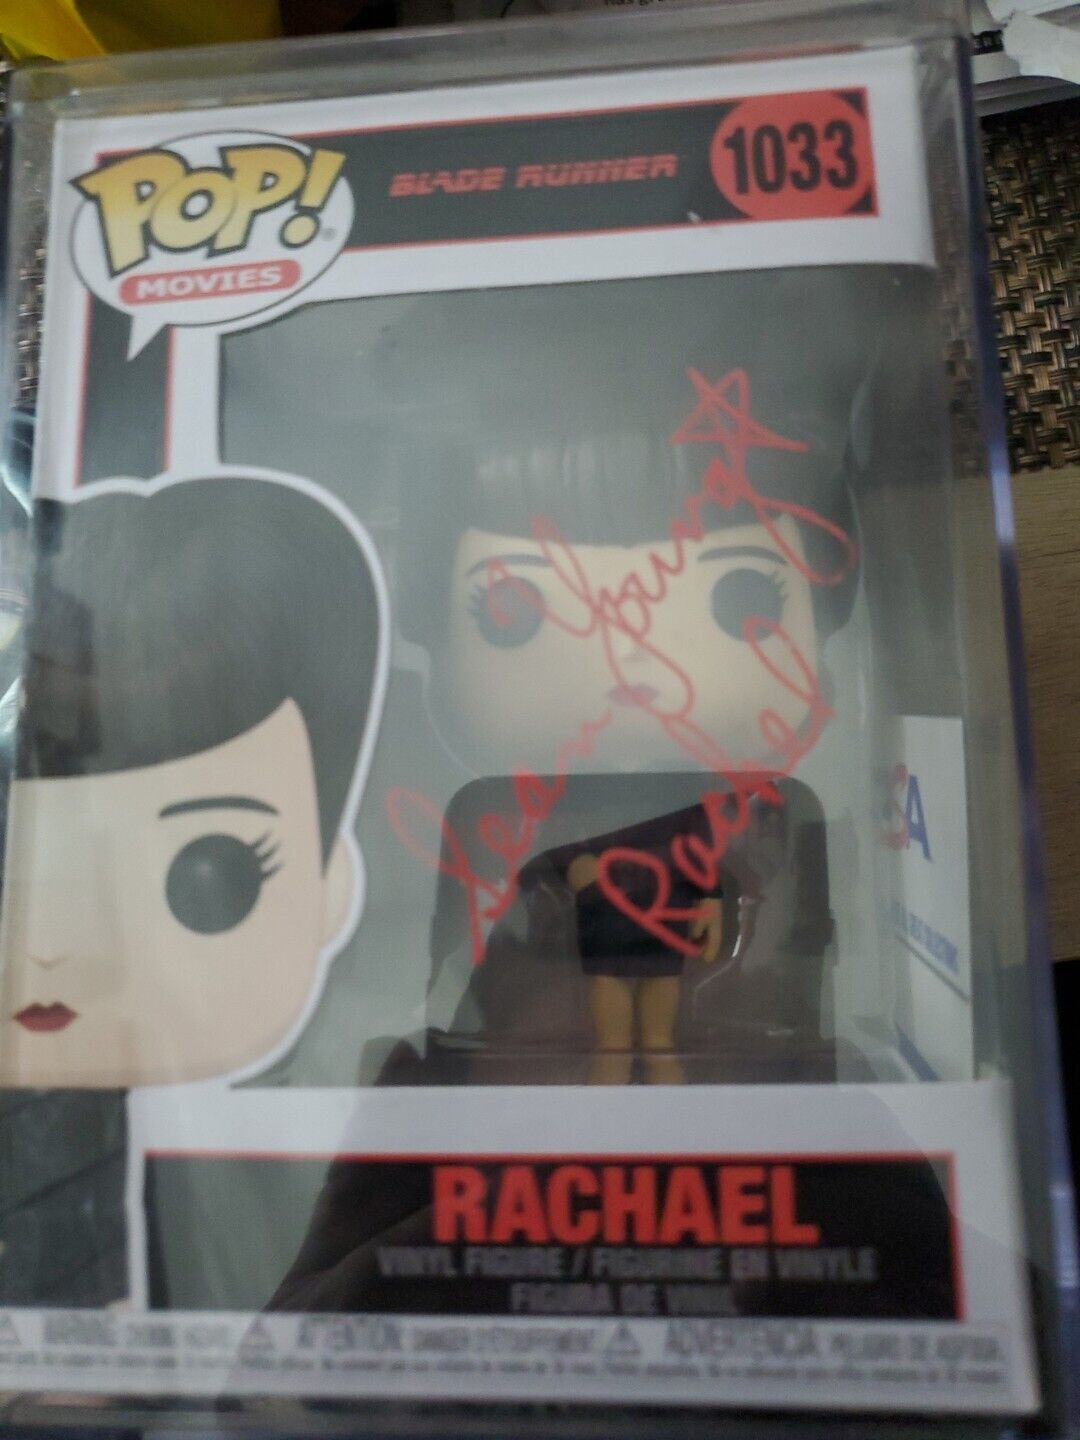 Funko Pop Vinyl: Blade Runner - Rachael #1033 Signed By Sean Young. Hard Stack